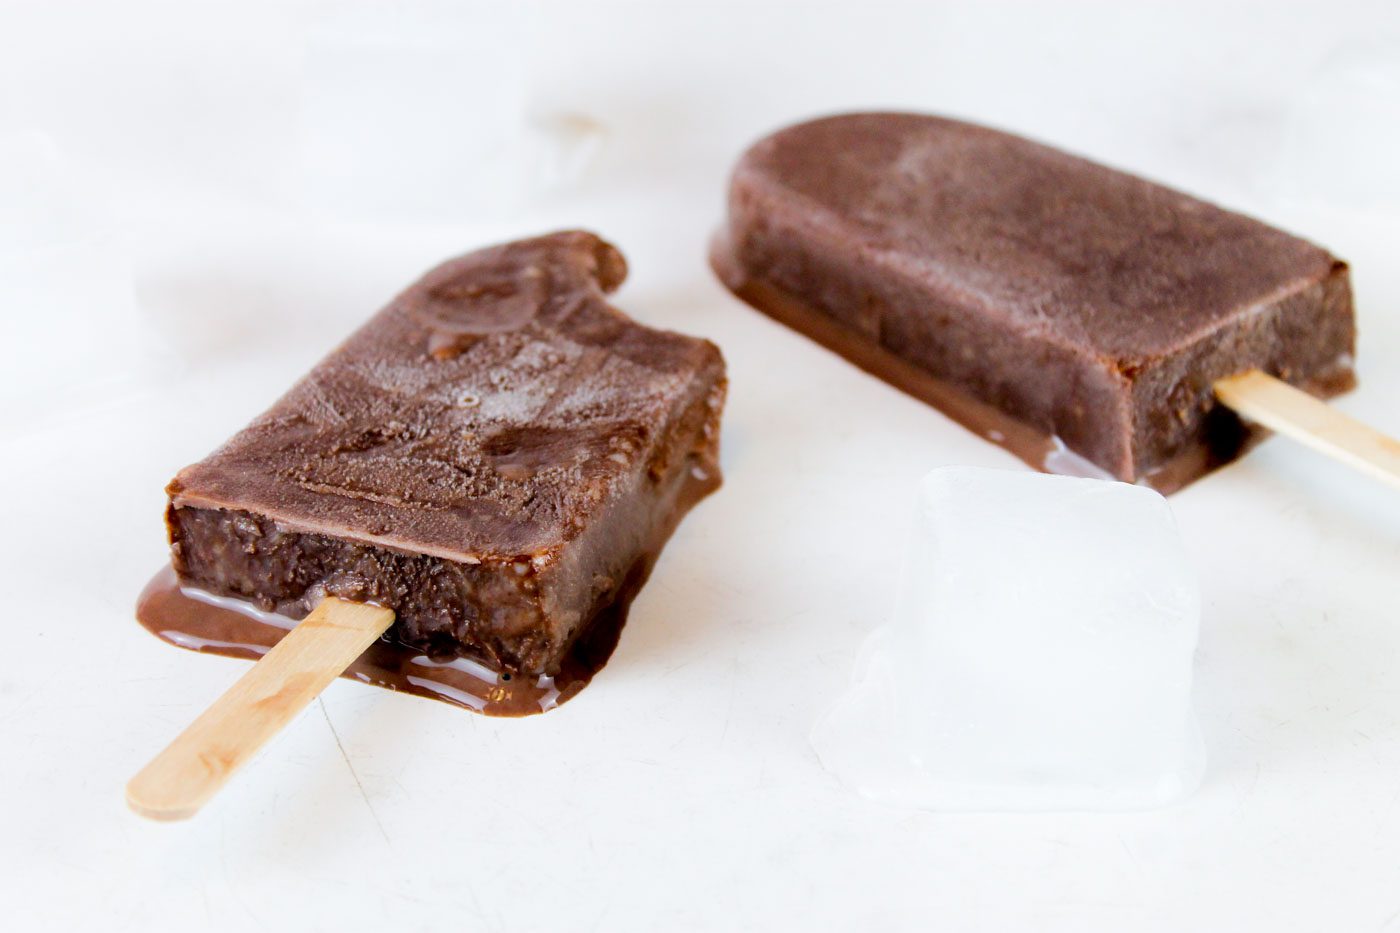 2 chocolate kefir popsicles sitting on a countertop melting